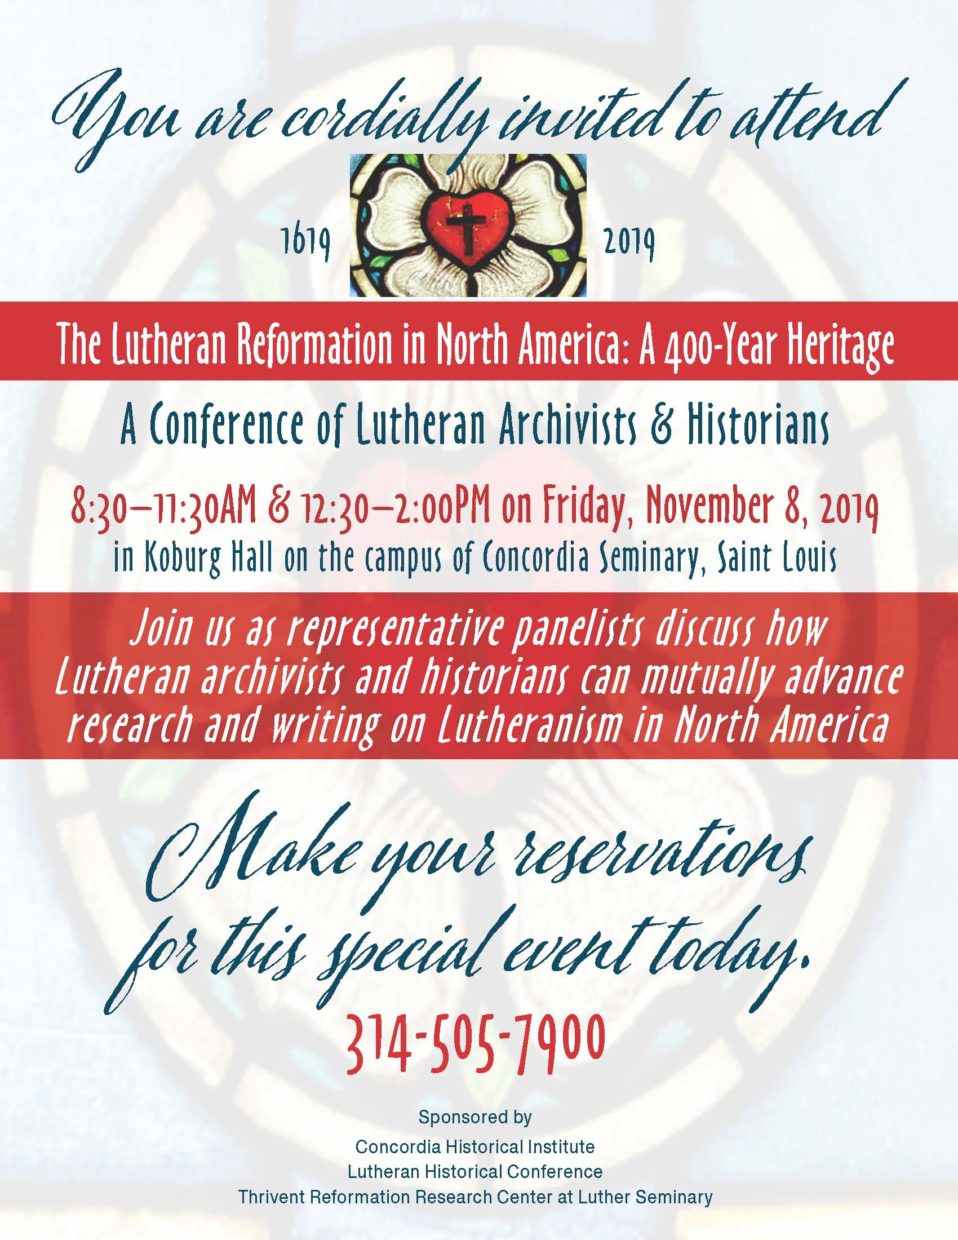 Conference on Lutheranism in North America